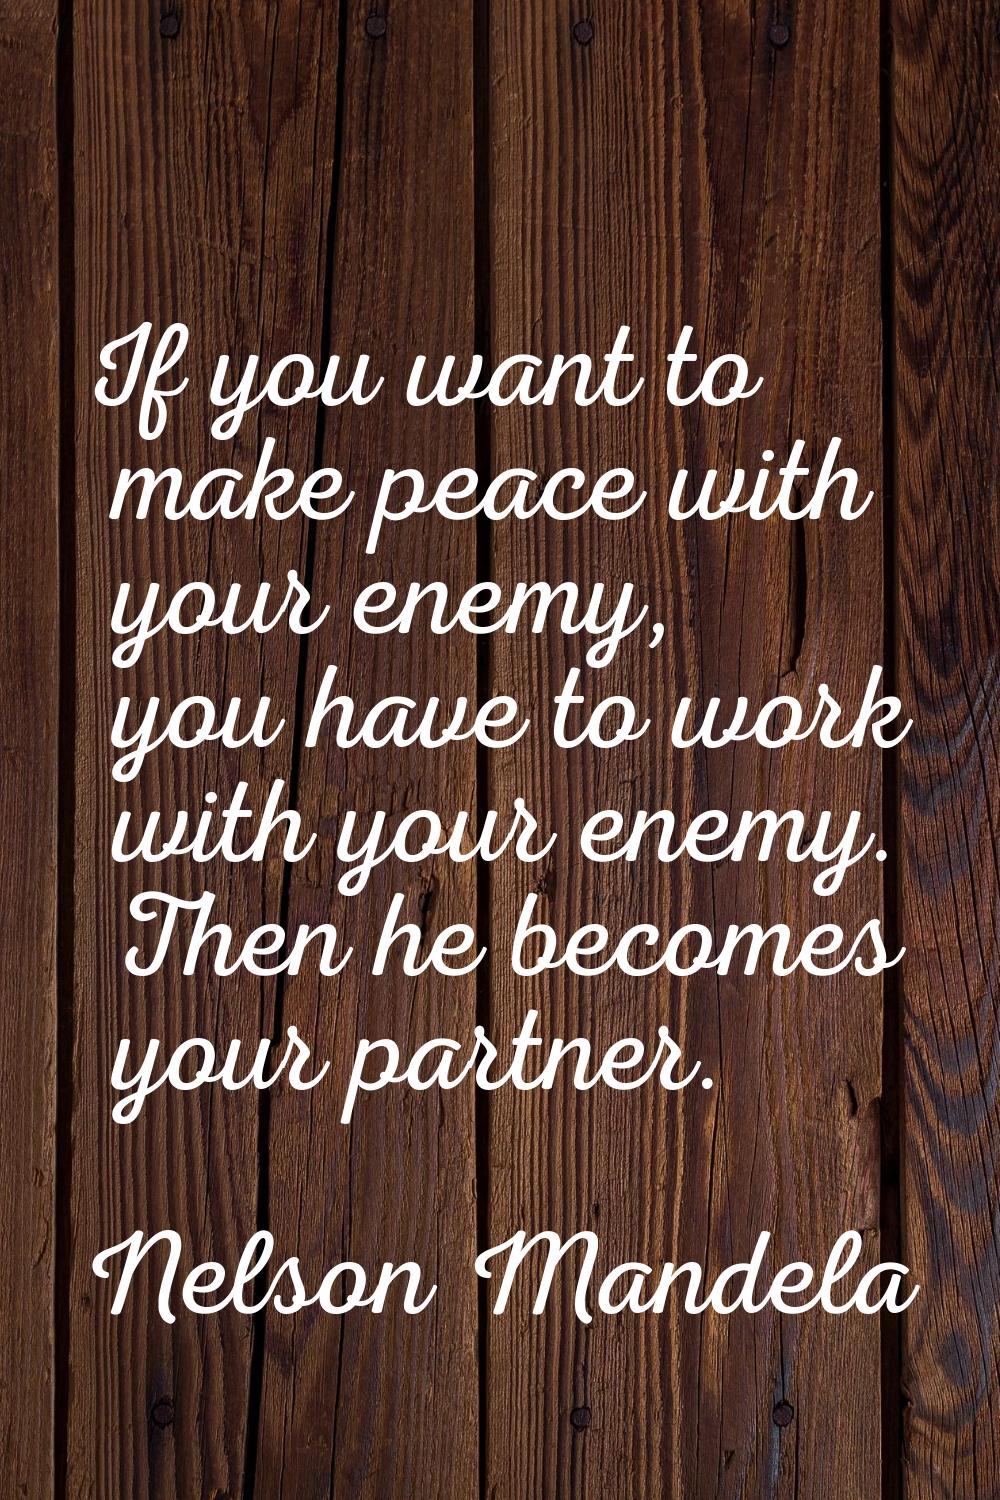 If you want to make peace with your enemy, you have to work with your enemy. Then he becomes your p